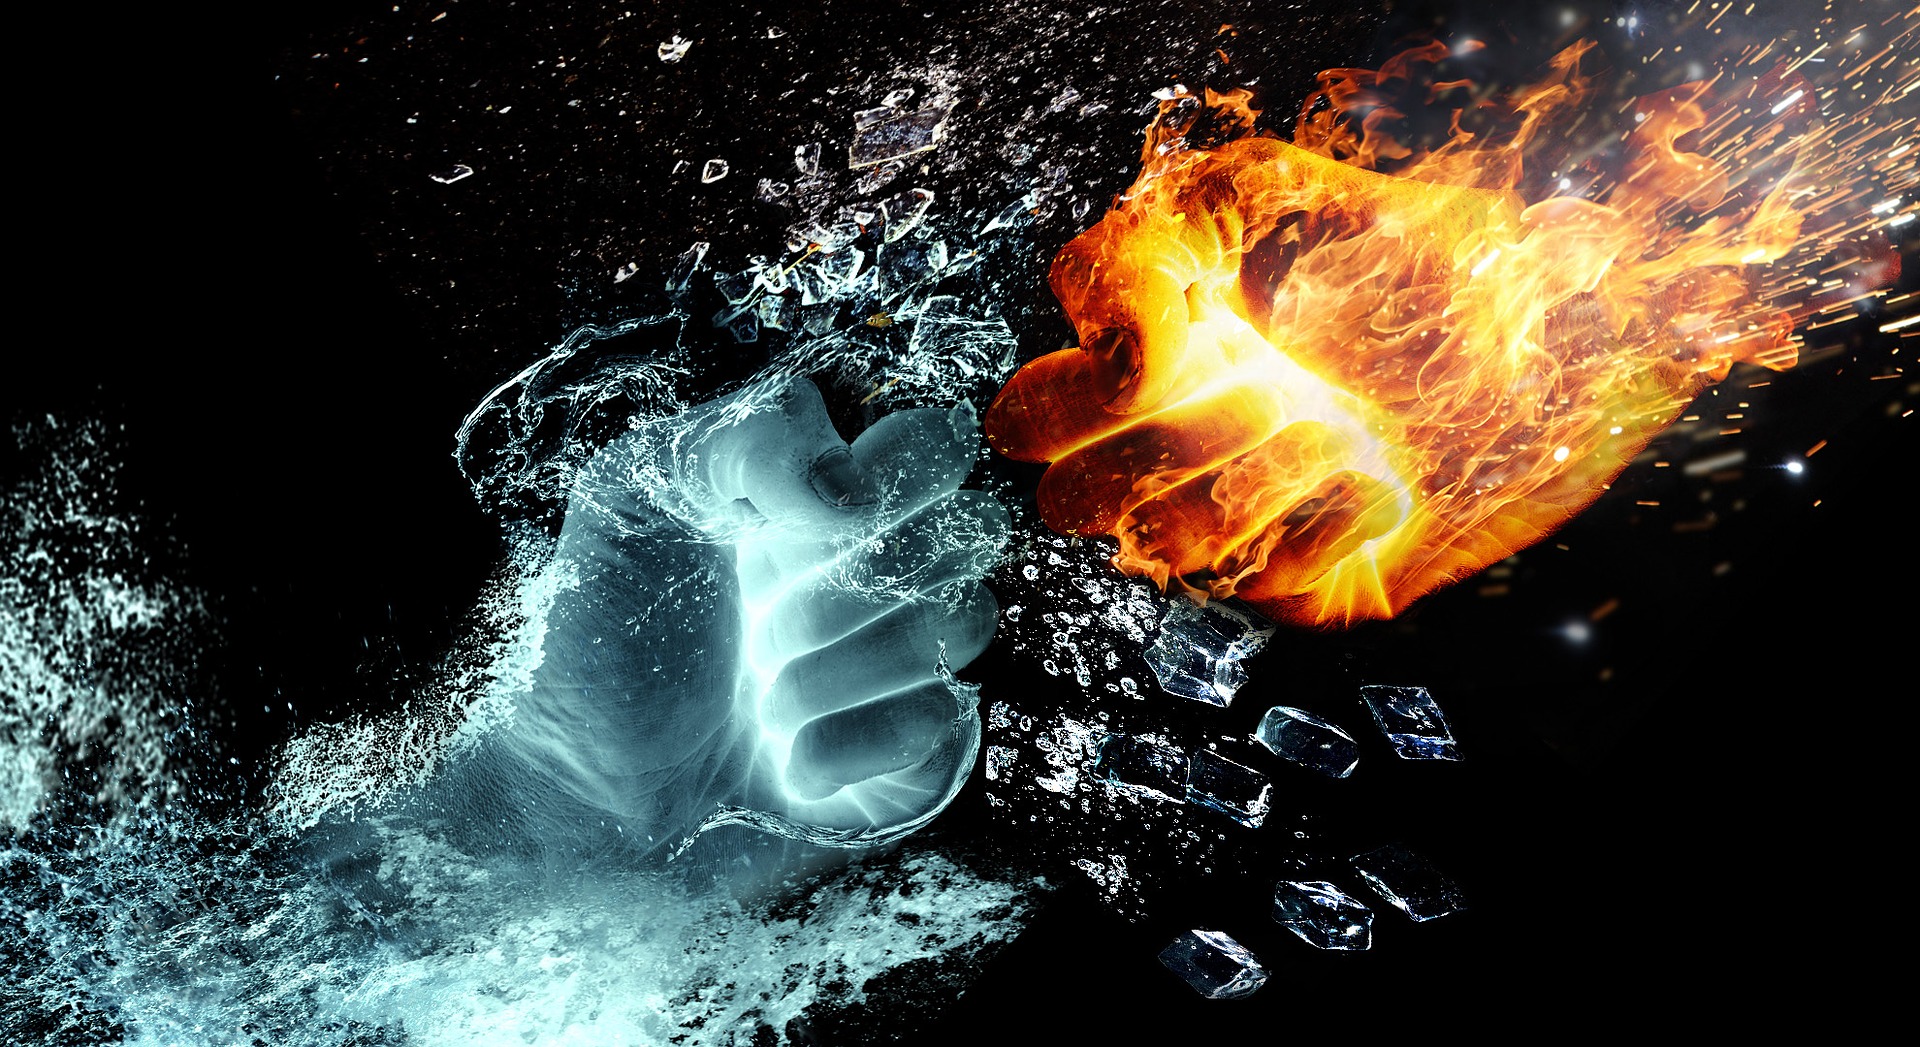 Fire and water in a battle to show how to transmute your emotions as a source of power in your life